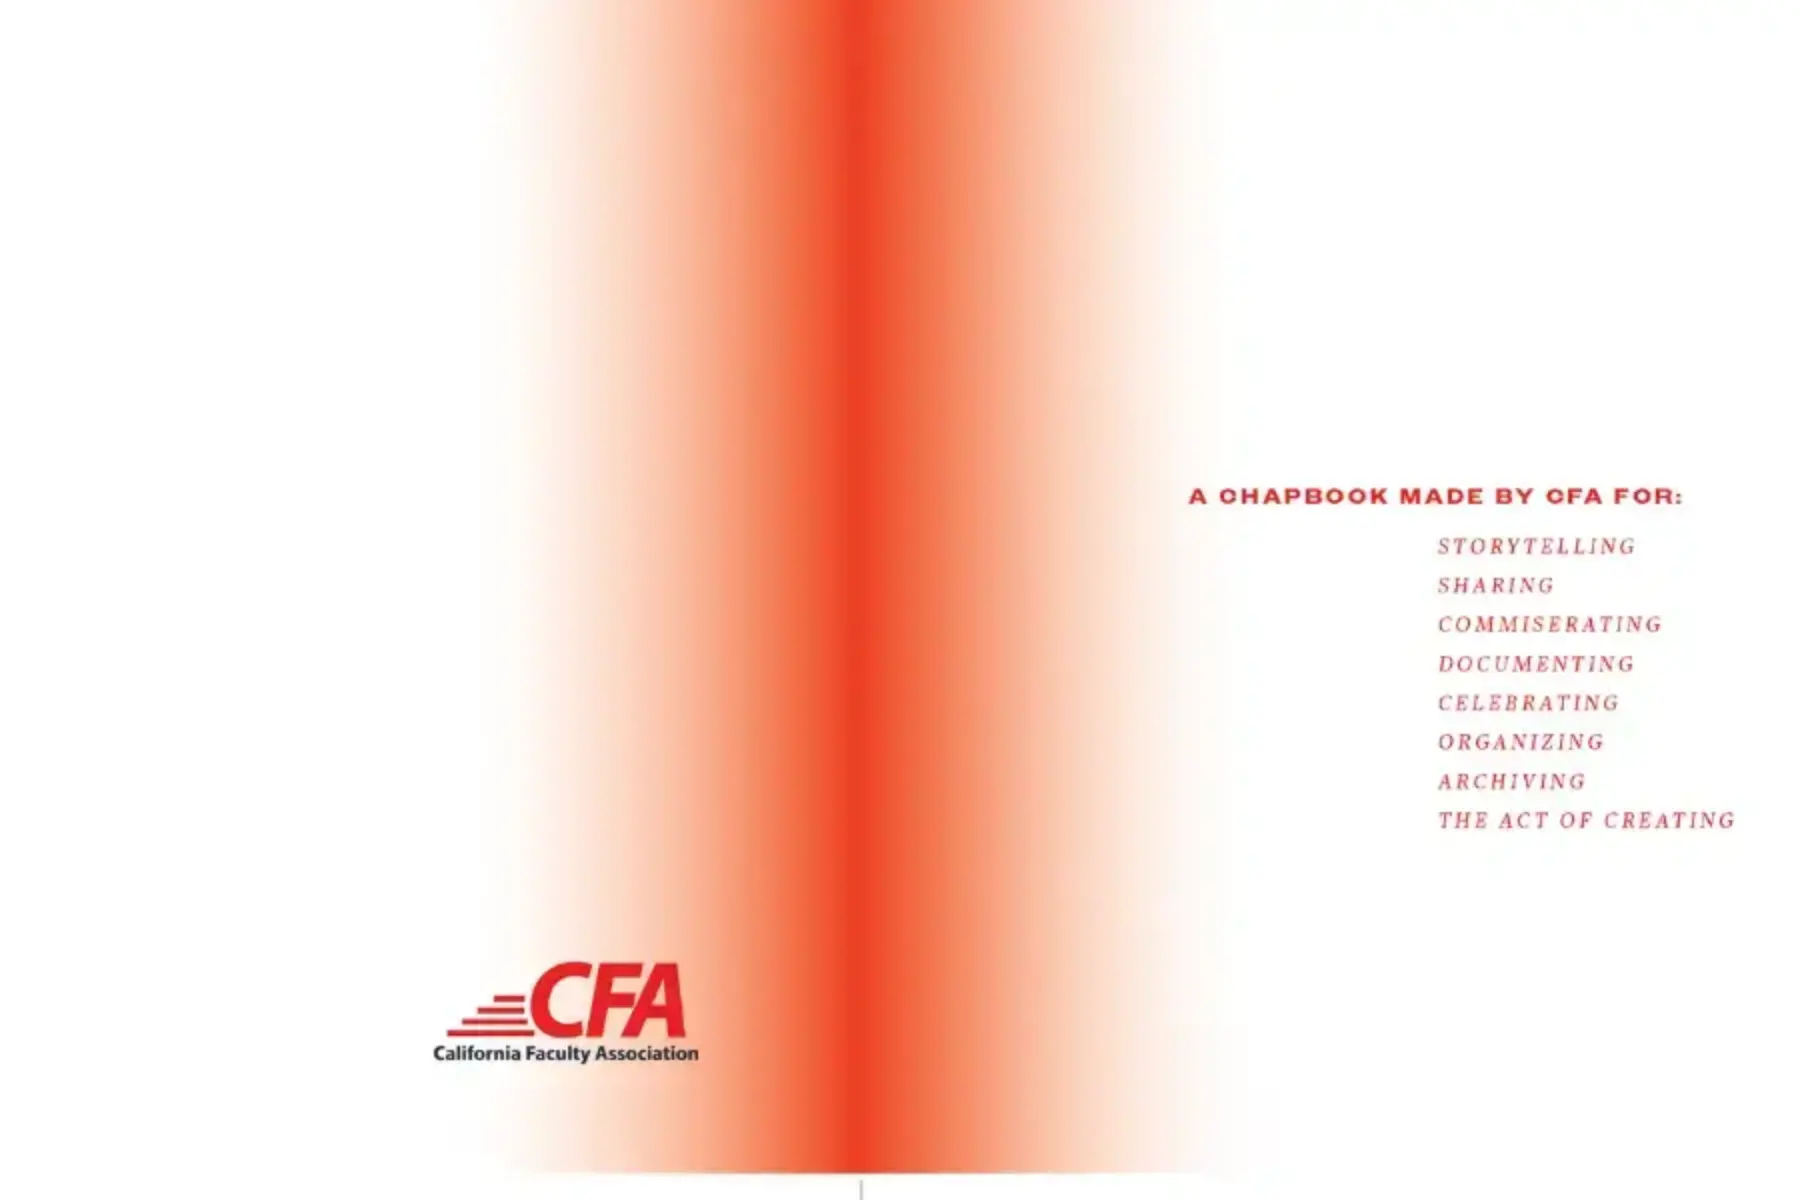 White background with red fading toward the middle. Red and black CFA logo to the left of middle toward the bottom of graphic. Red text to the right of middle reads: A chapbook made by CFA for: storytelling, sharing, commiserating, documenting, celebrating, organizing, archiving, the act of creating.